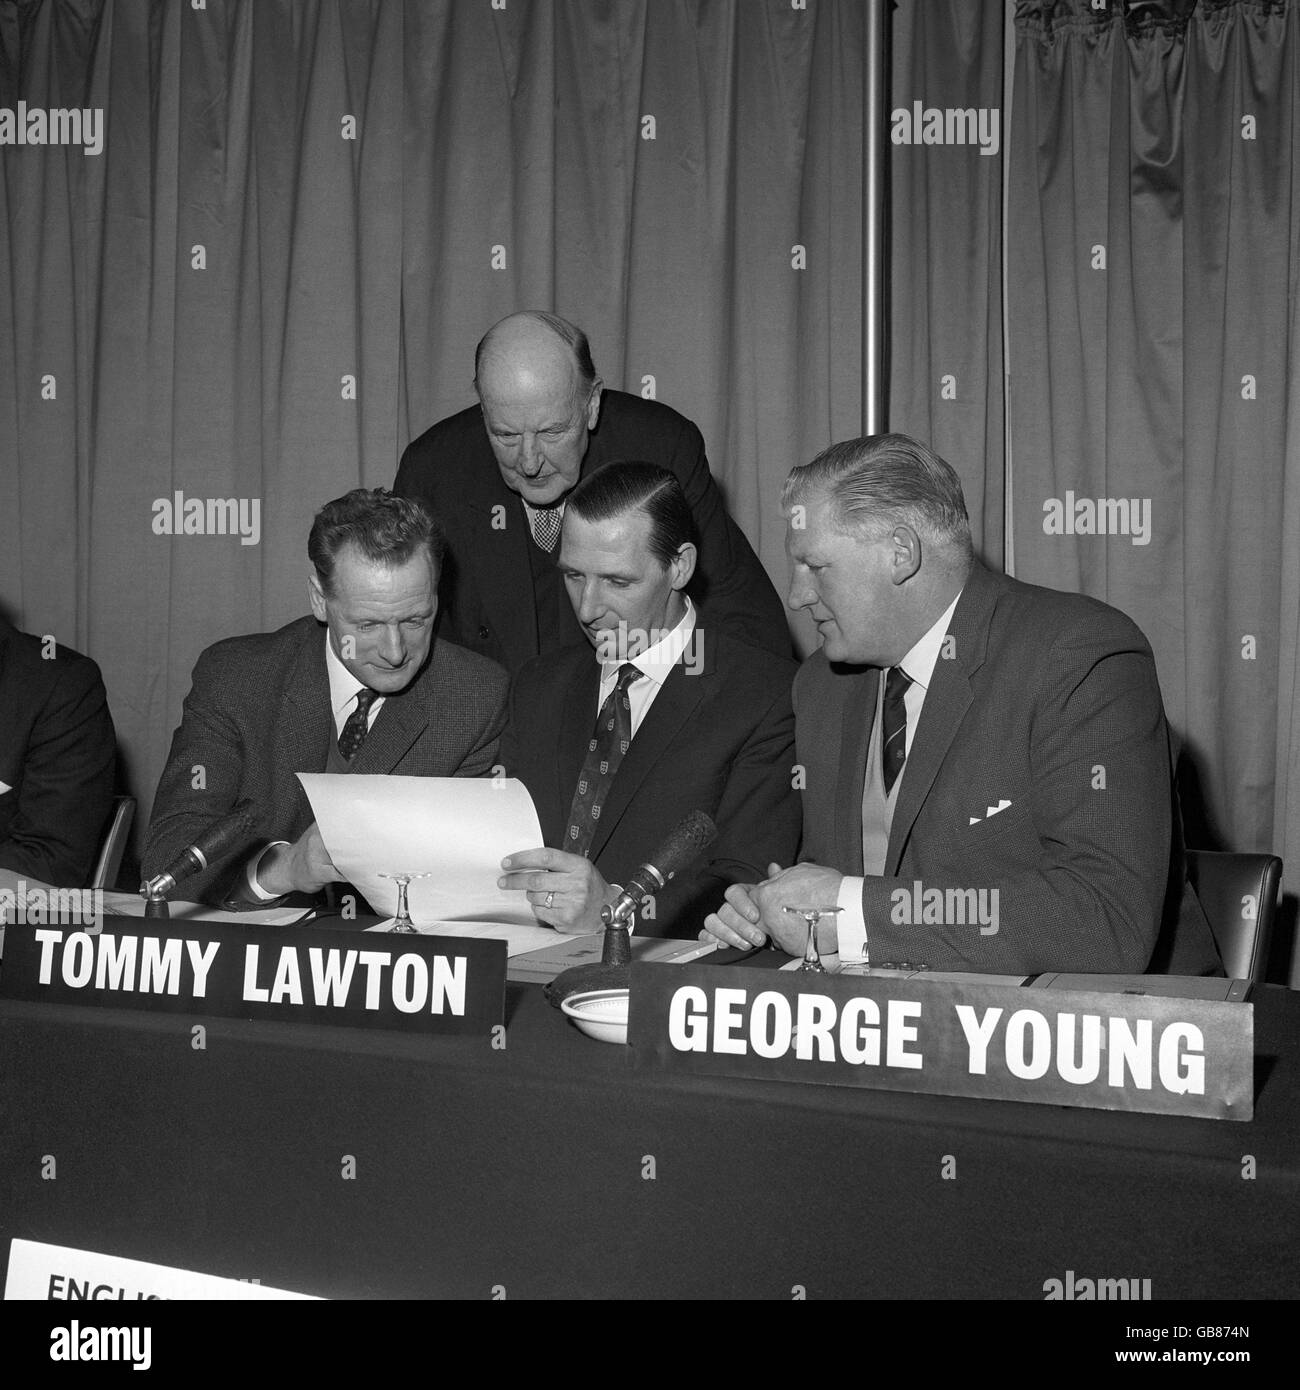 Lord Brabazon of Tara, the 78 year old chairman, looks over the shoulders of the three men of the panel. Left to right, seated: Tom Finney, formerly of Preston North End; Tommy Lawton, the great England centre-forward and George Young, the former Scottish international full-back. Stock Photo